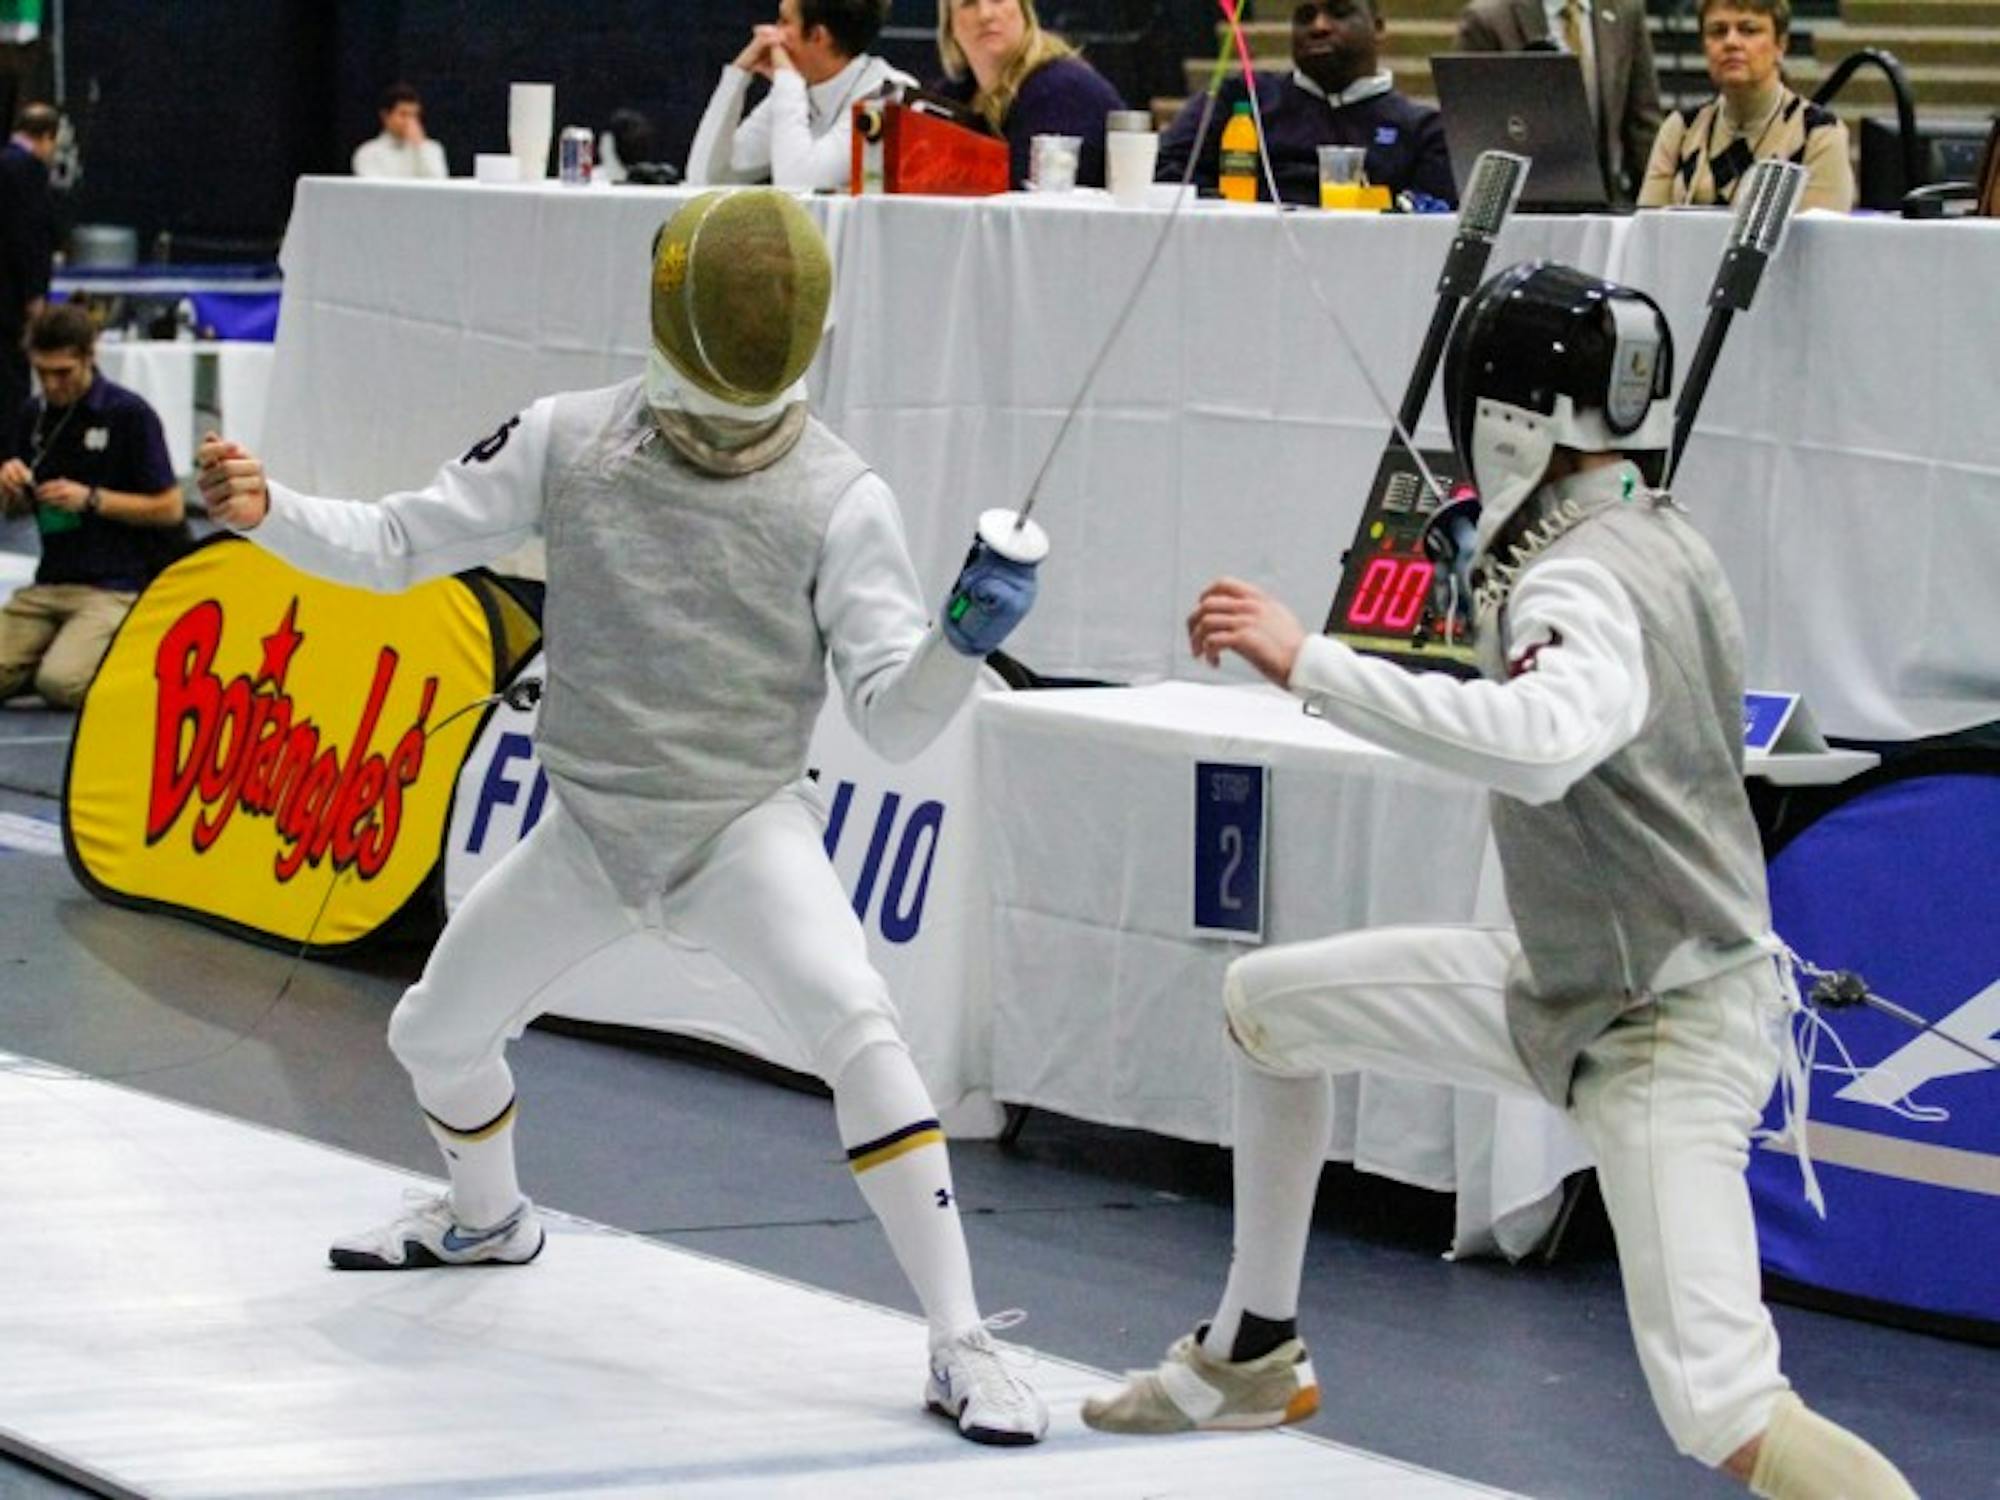 Irish junior foilist Virgile Collineau lunges at his opponent during the ACC championships on Feb. 28, 2016, at Castellan Family Fencing Center. The Irish look to repeat as ACC champs this year.